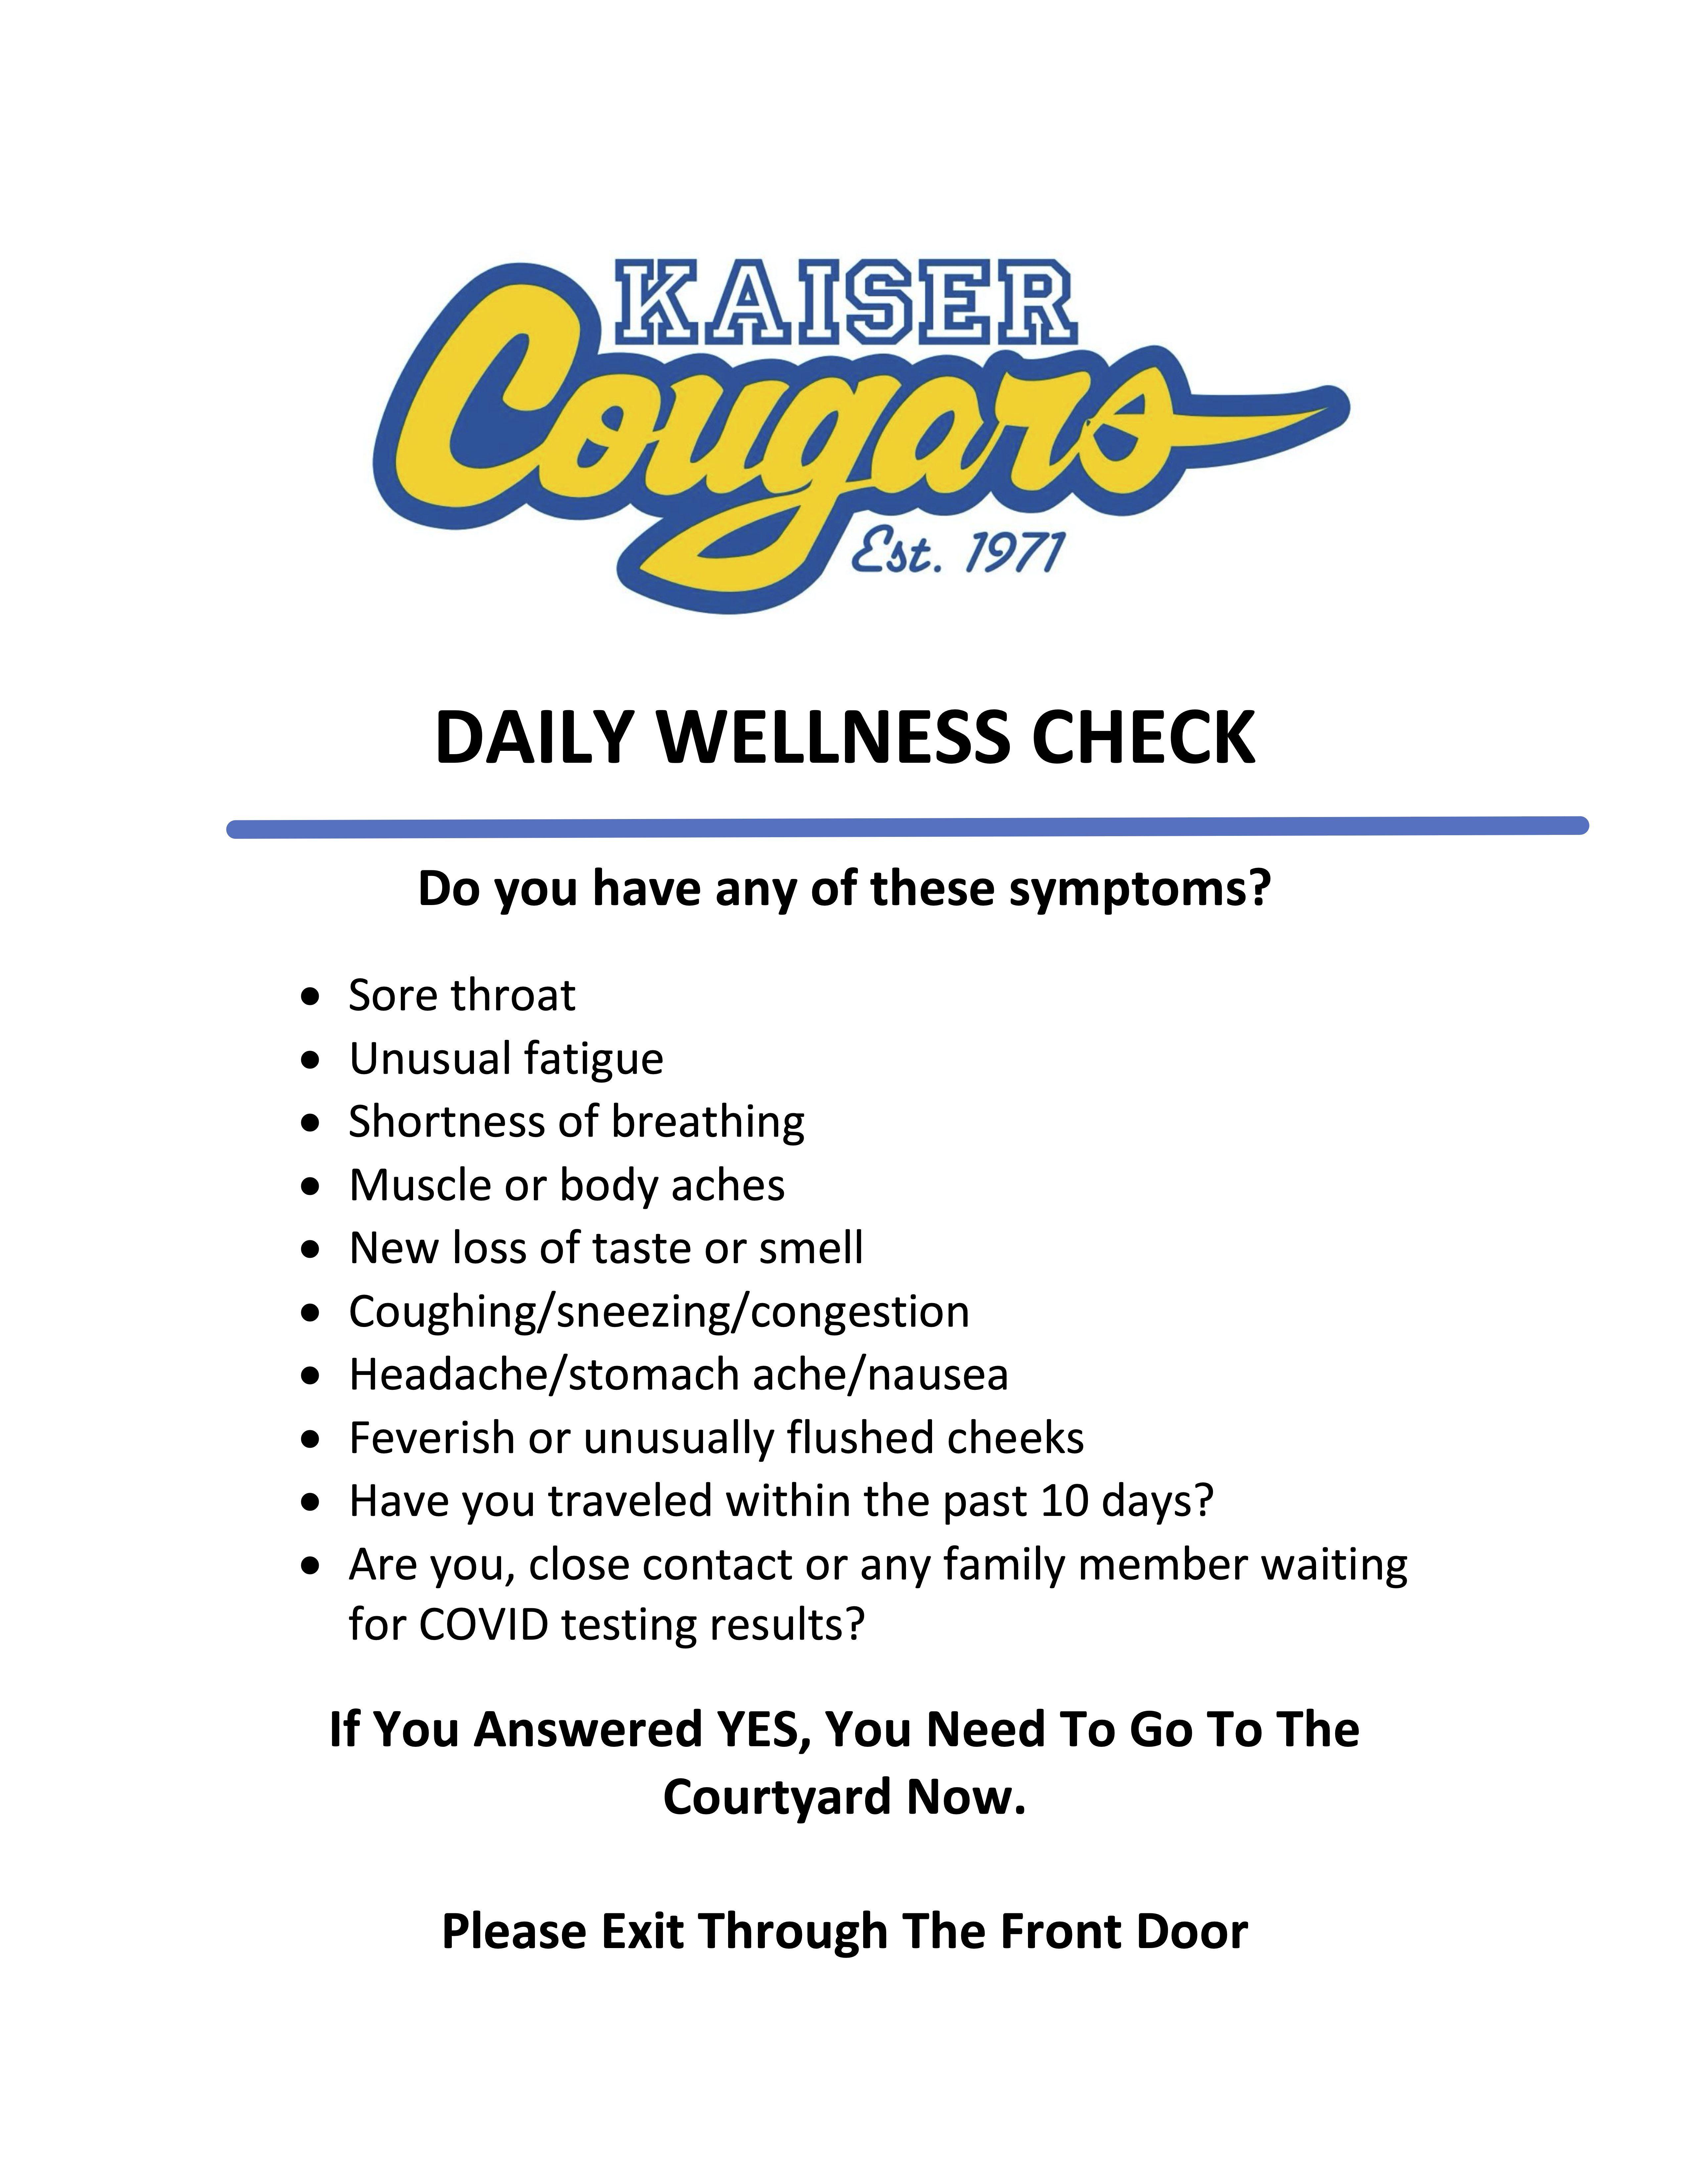 Daily Wellness Check Poster 